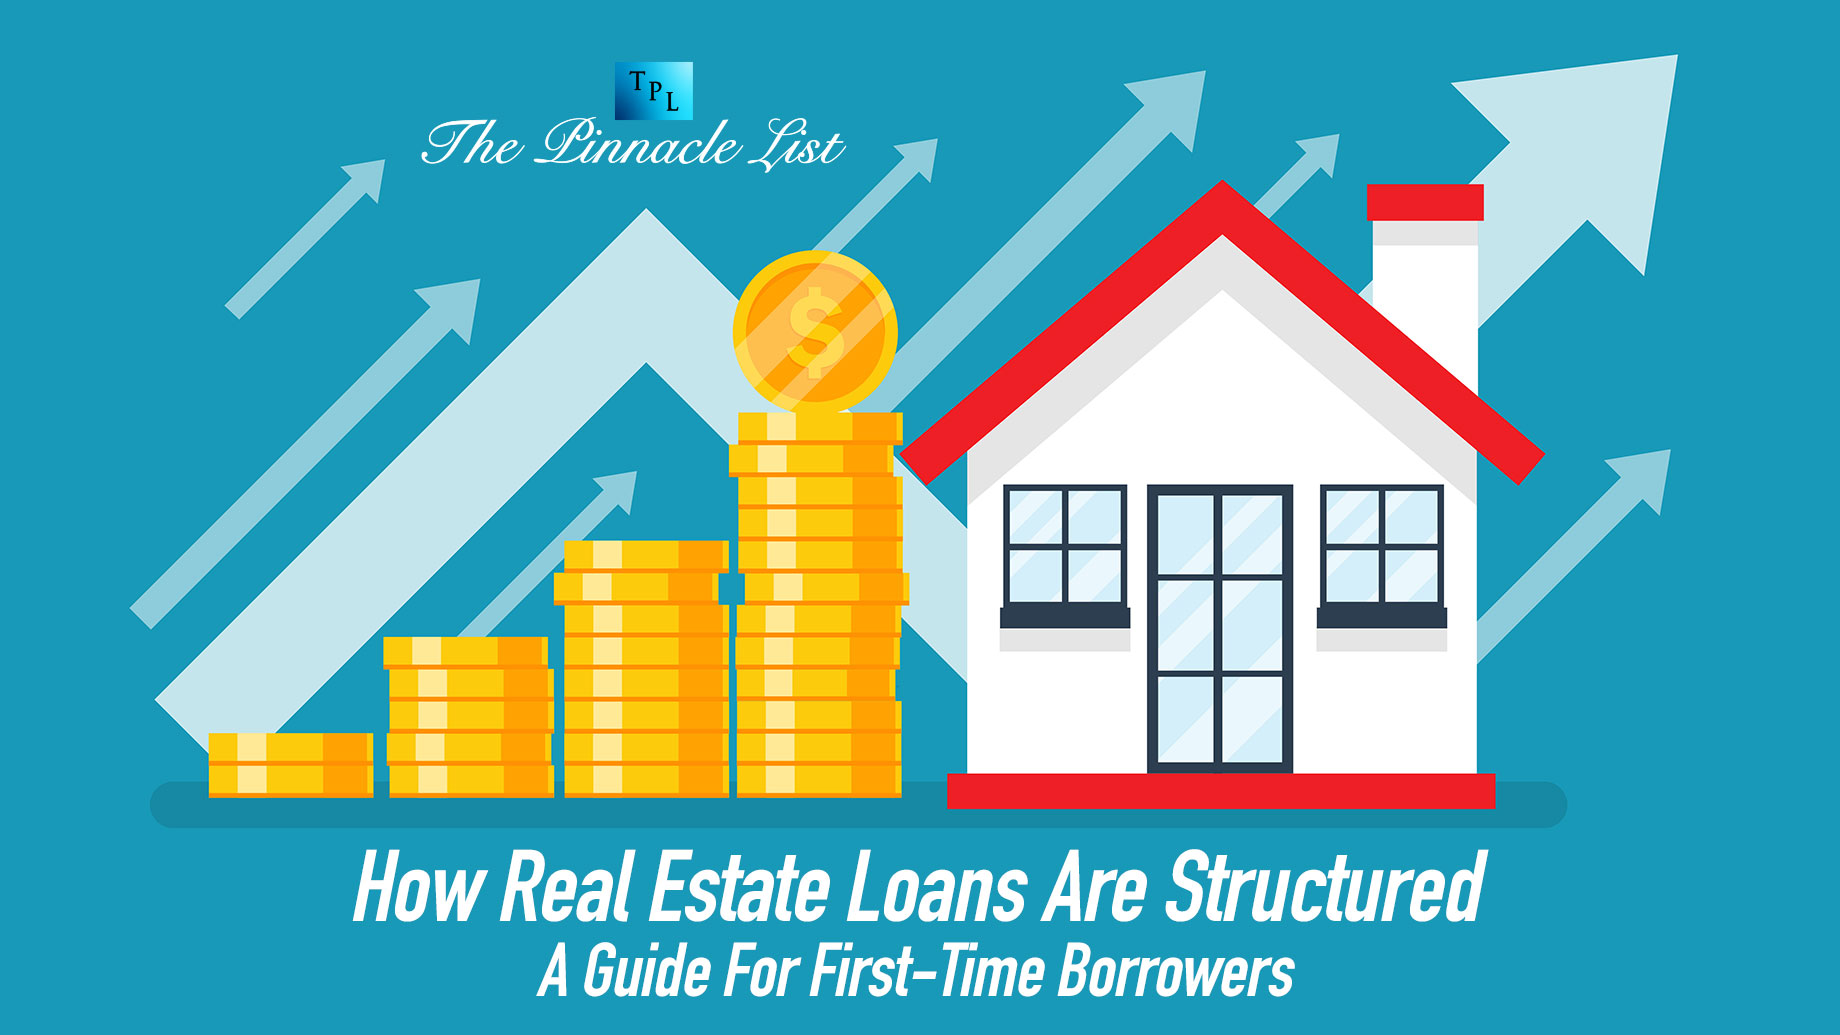 How Real Estate Loans Are Structured: A Guide For First-Time Borrowers